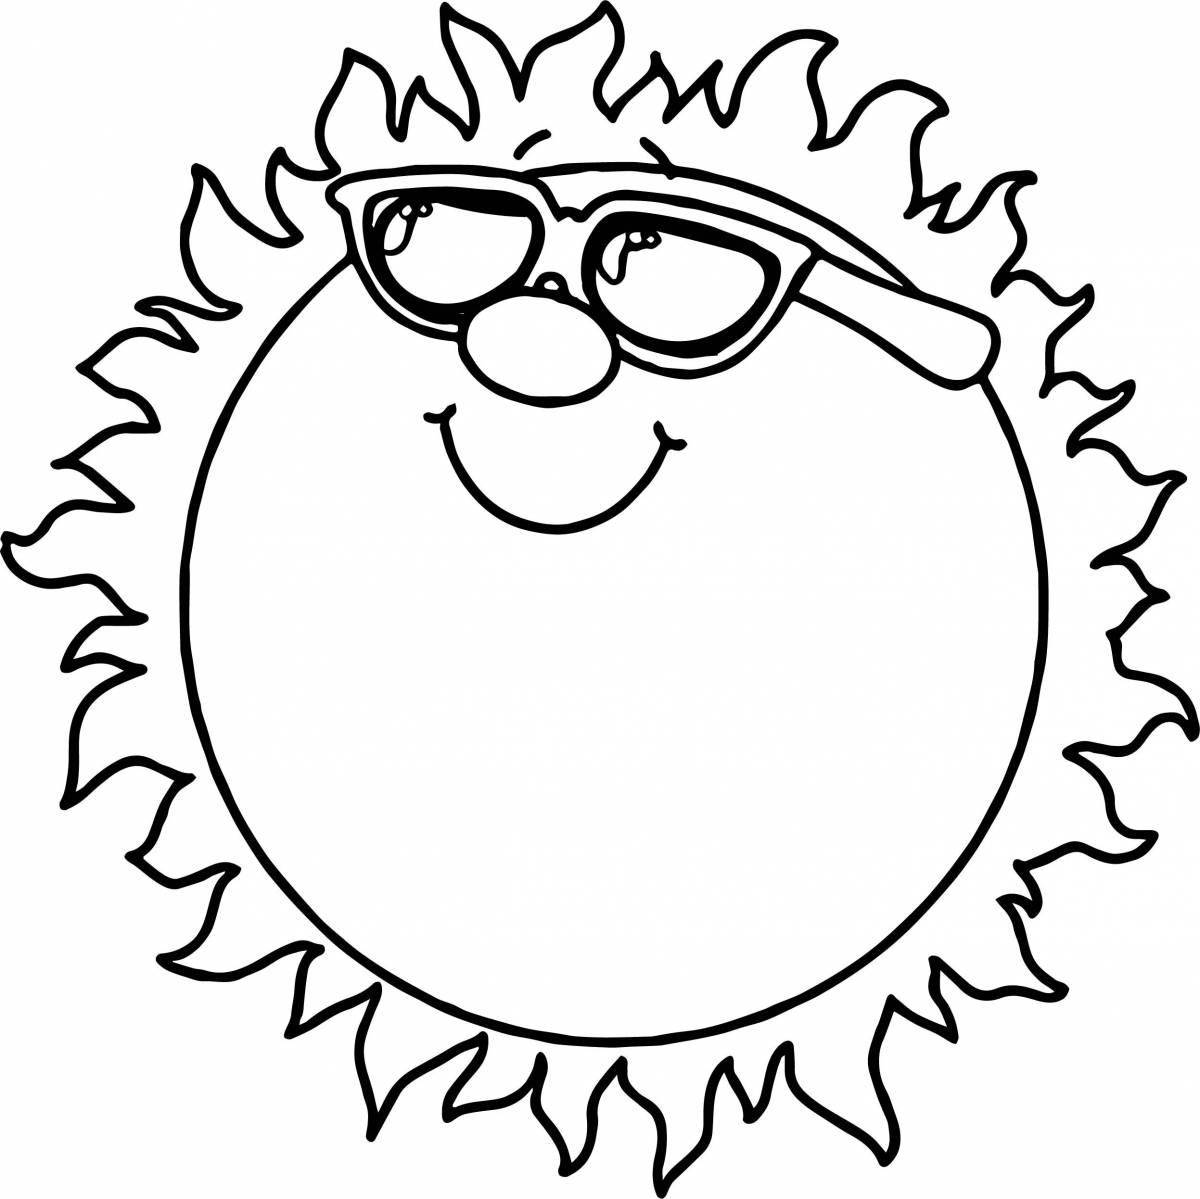 Adorable sun pattern coloring page